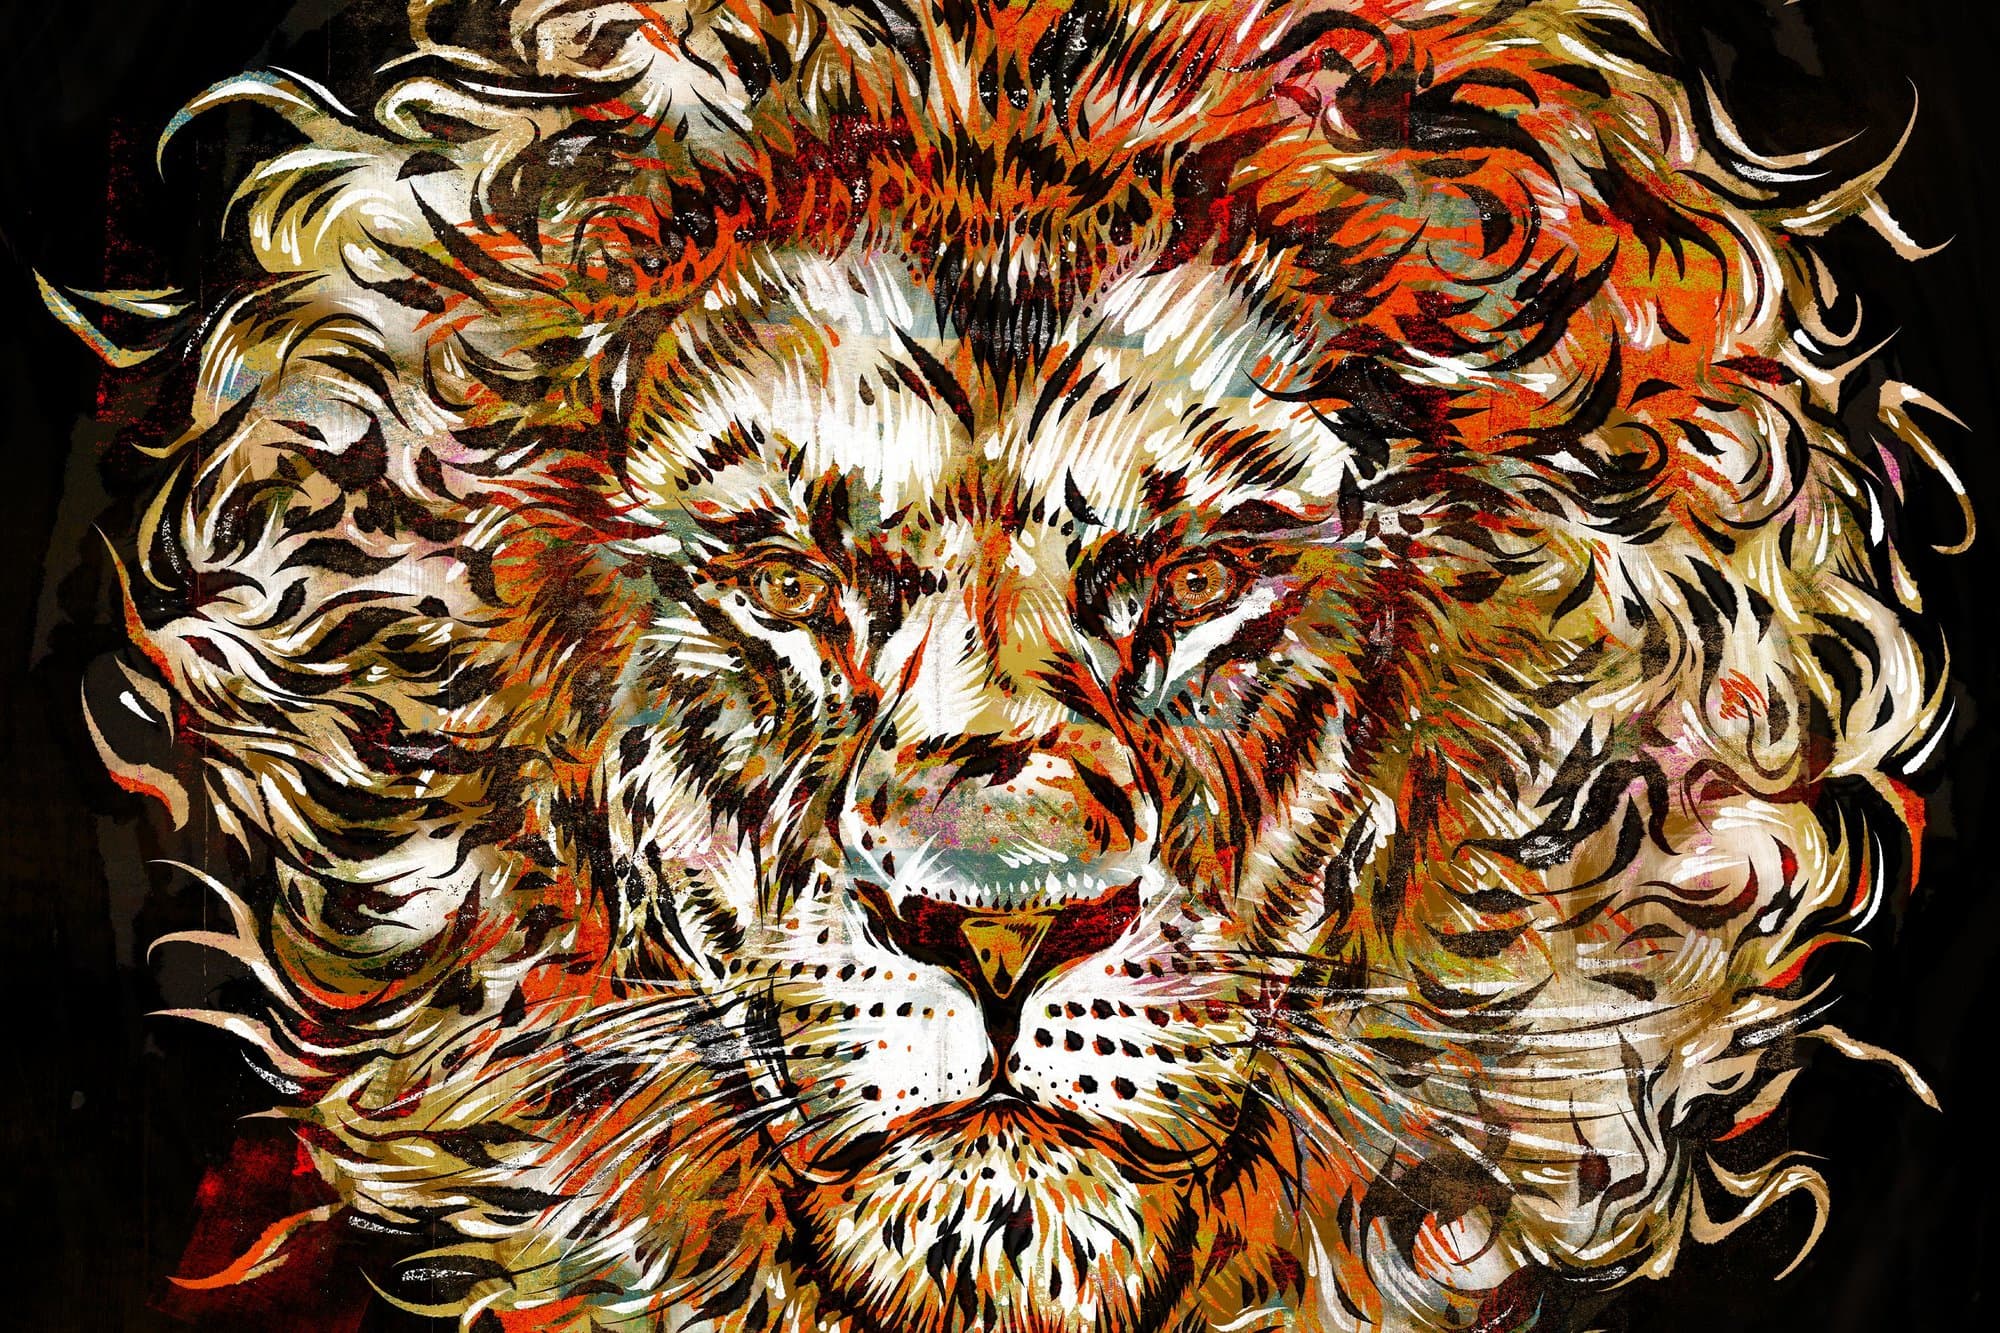 Abstract painting of the face of a lion